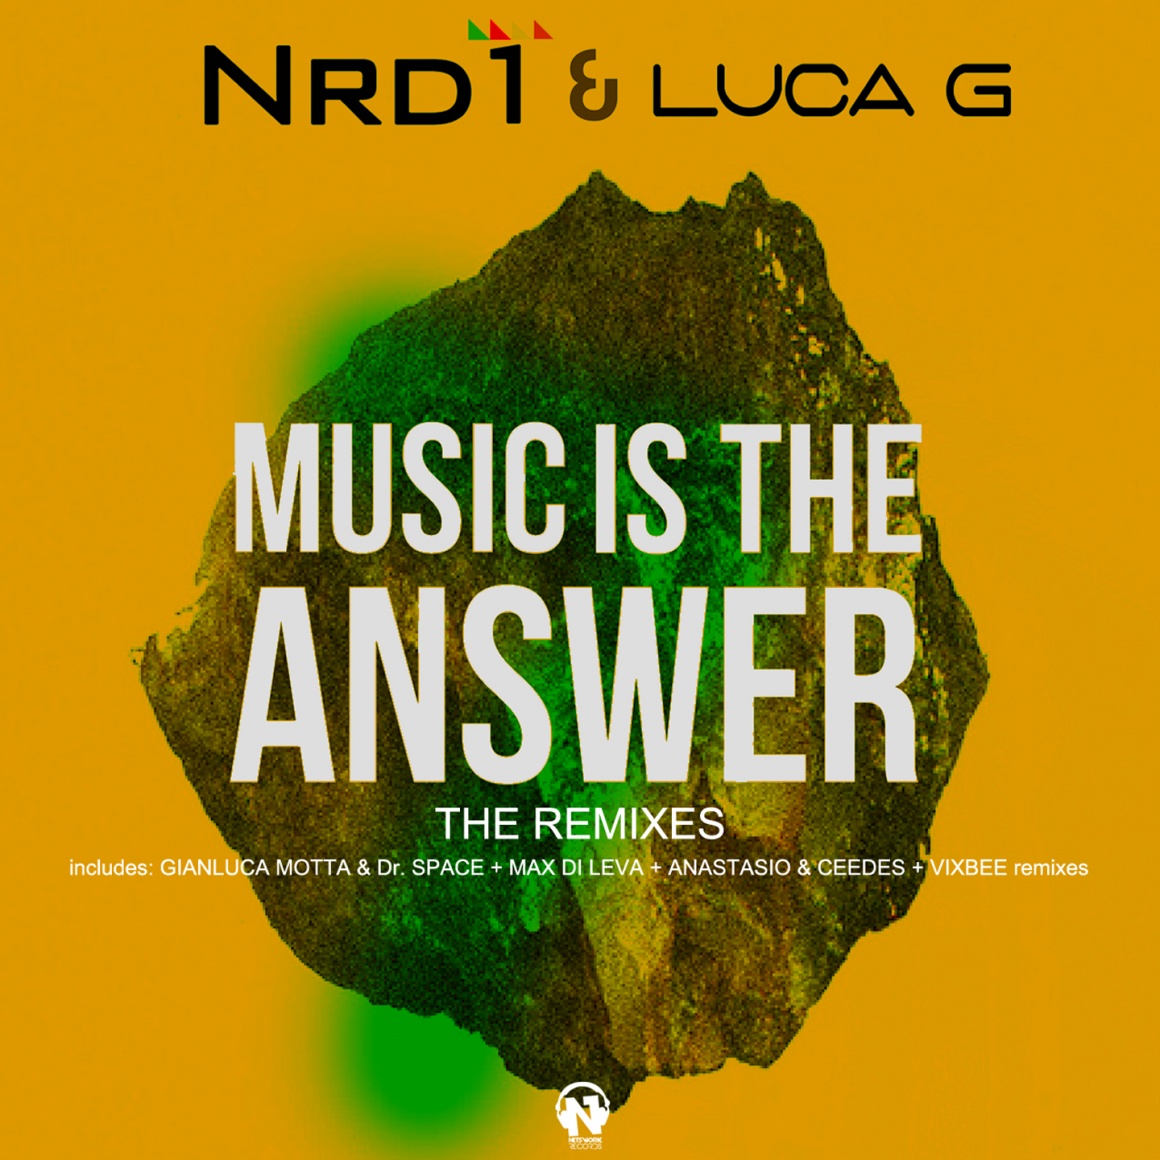 NRD1 & LUCA G   “Music Is The Answer (The Remixes)”